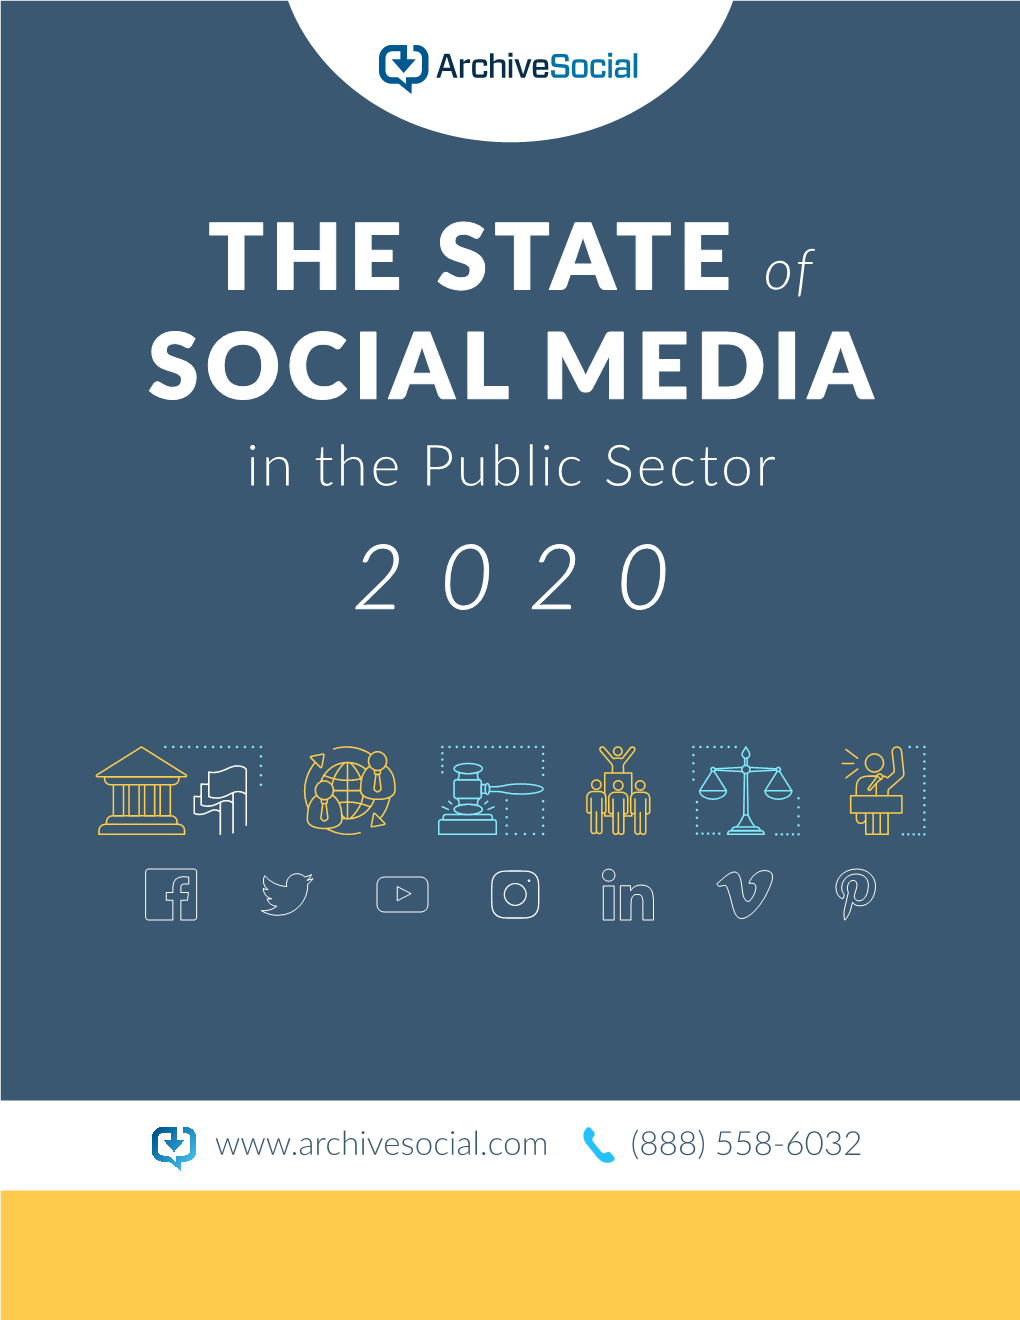 THE STATE of SOCIAL MEDIA in the Public Sector 2020